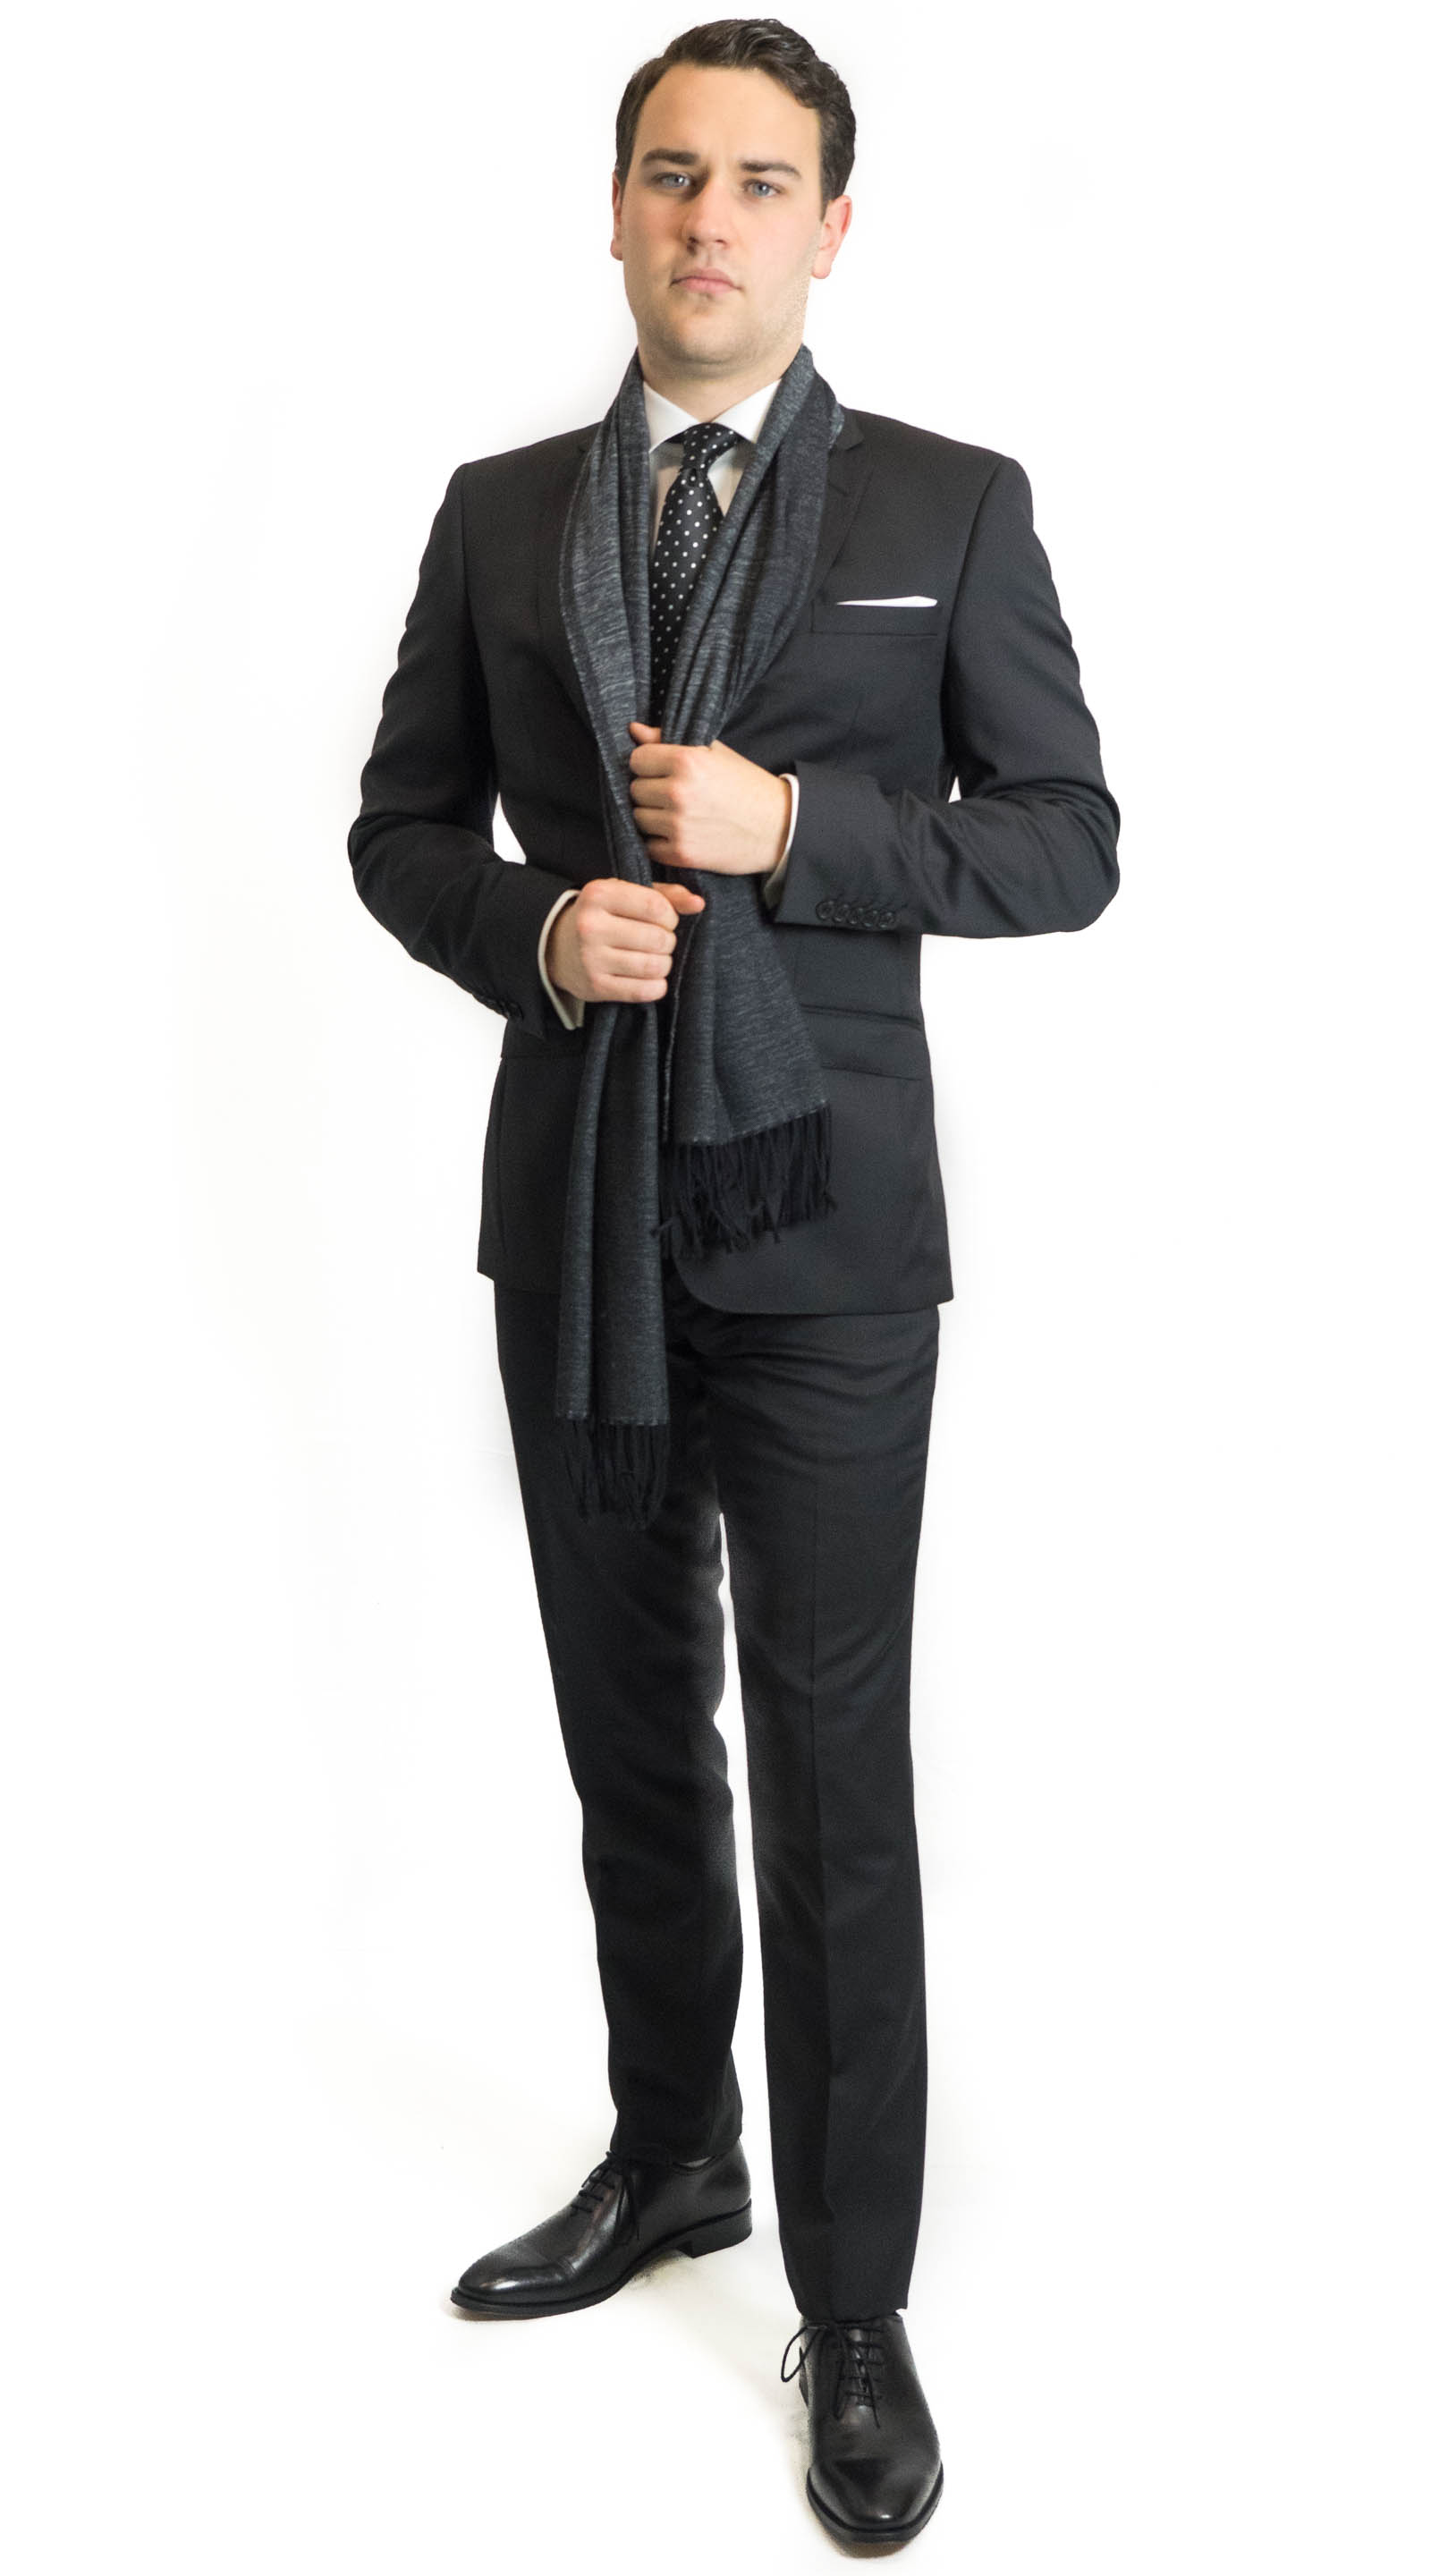 Mens suits, formal, wedding suits, auckland | Suits on Broadway